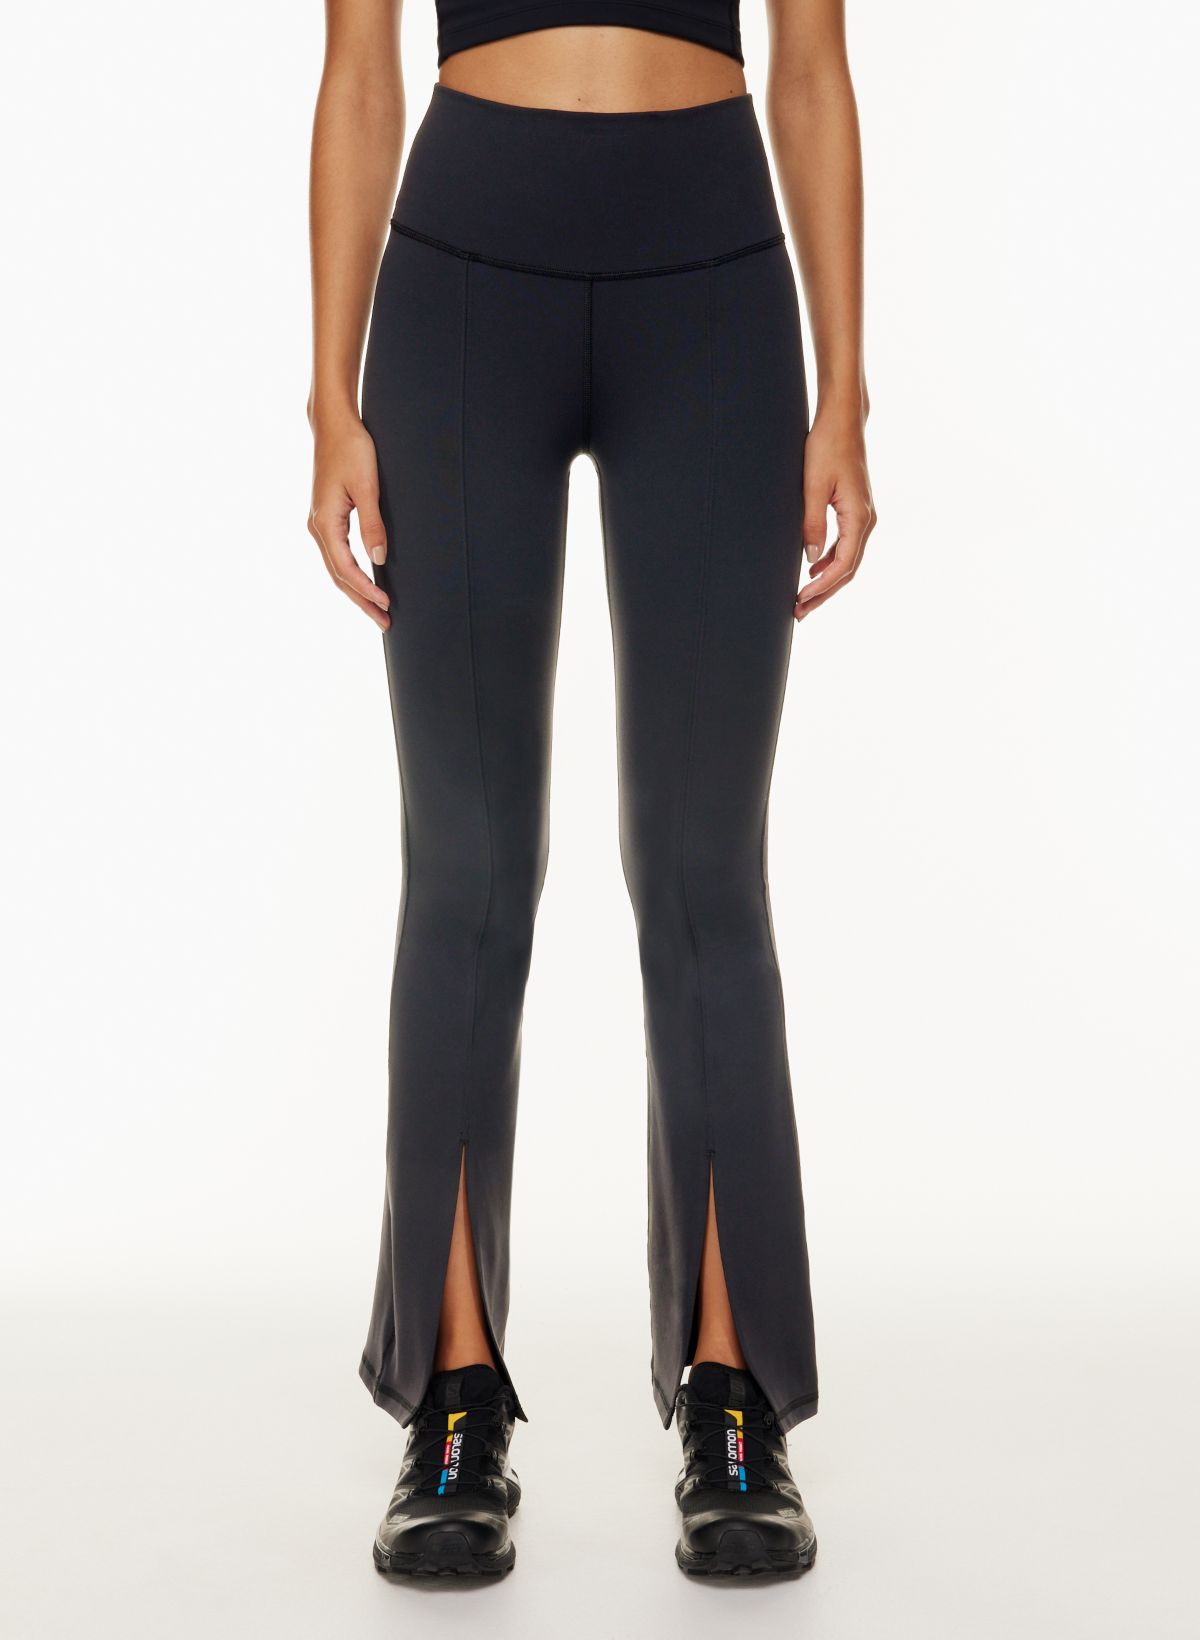 Lu Lu Yoga Lemon Low Rise Aritzia Flare Leggings For Women Flare Pants With  Hip Lift For Outdoor Sports, Fitness, Dance, Running And Athletic  Activities From Aayingliking, $2.7